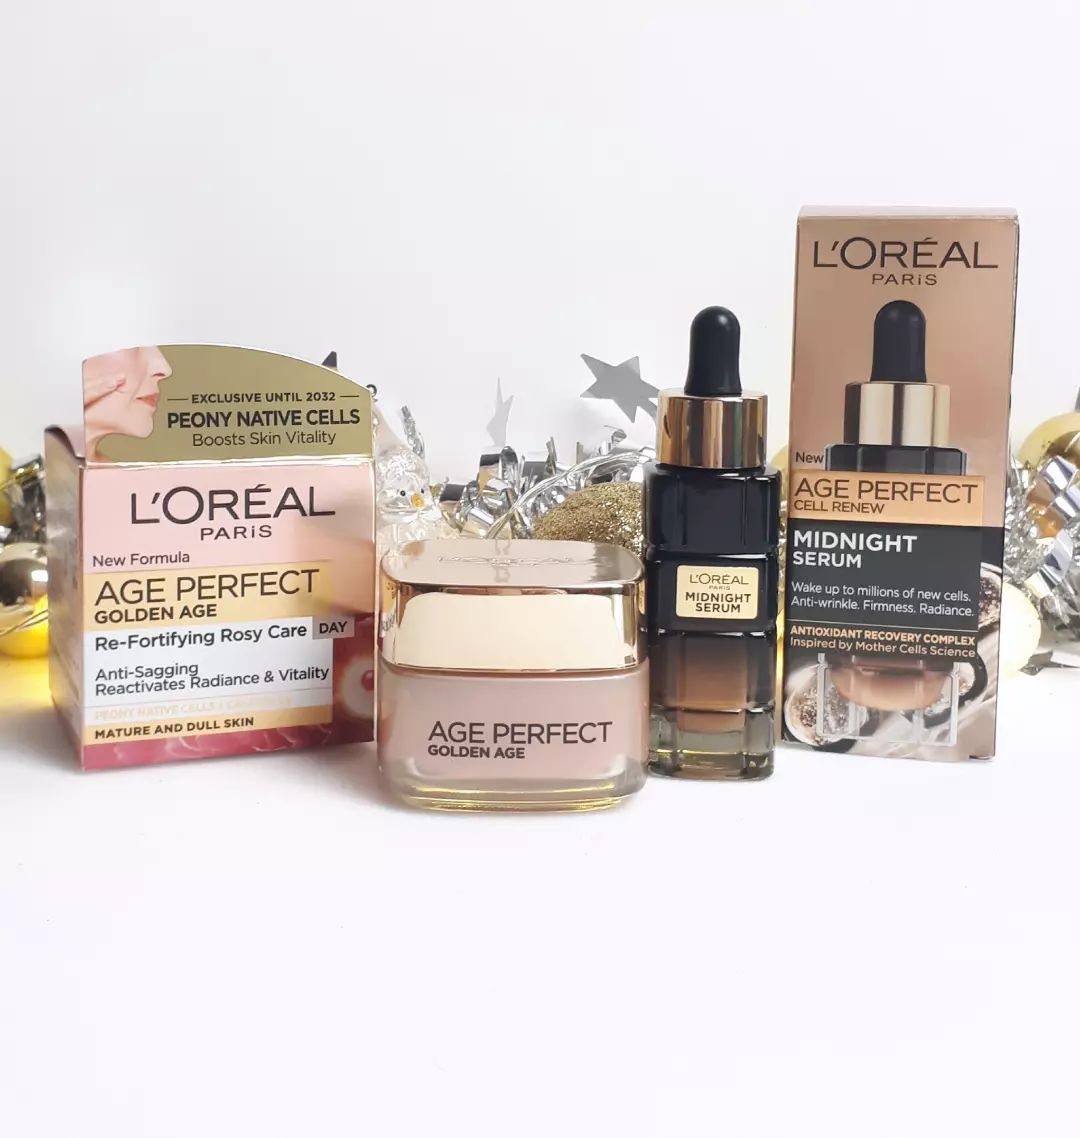 I have wanted the @lorealparis Age Perfect Cell Renew Midnight Serum for forever. I was lucky enough to win a £250 @amazonuk gift voucher via a giveaway with @therese_ryan_ so along with a few gifts for #christmas I also popped a couple of beauties from @lorealparis into my basket.